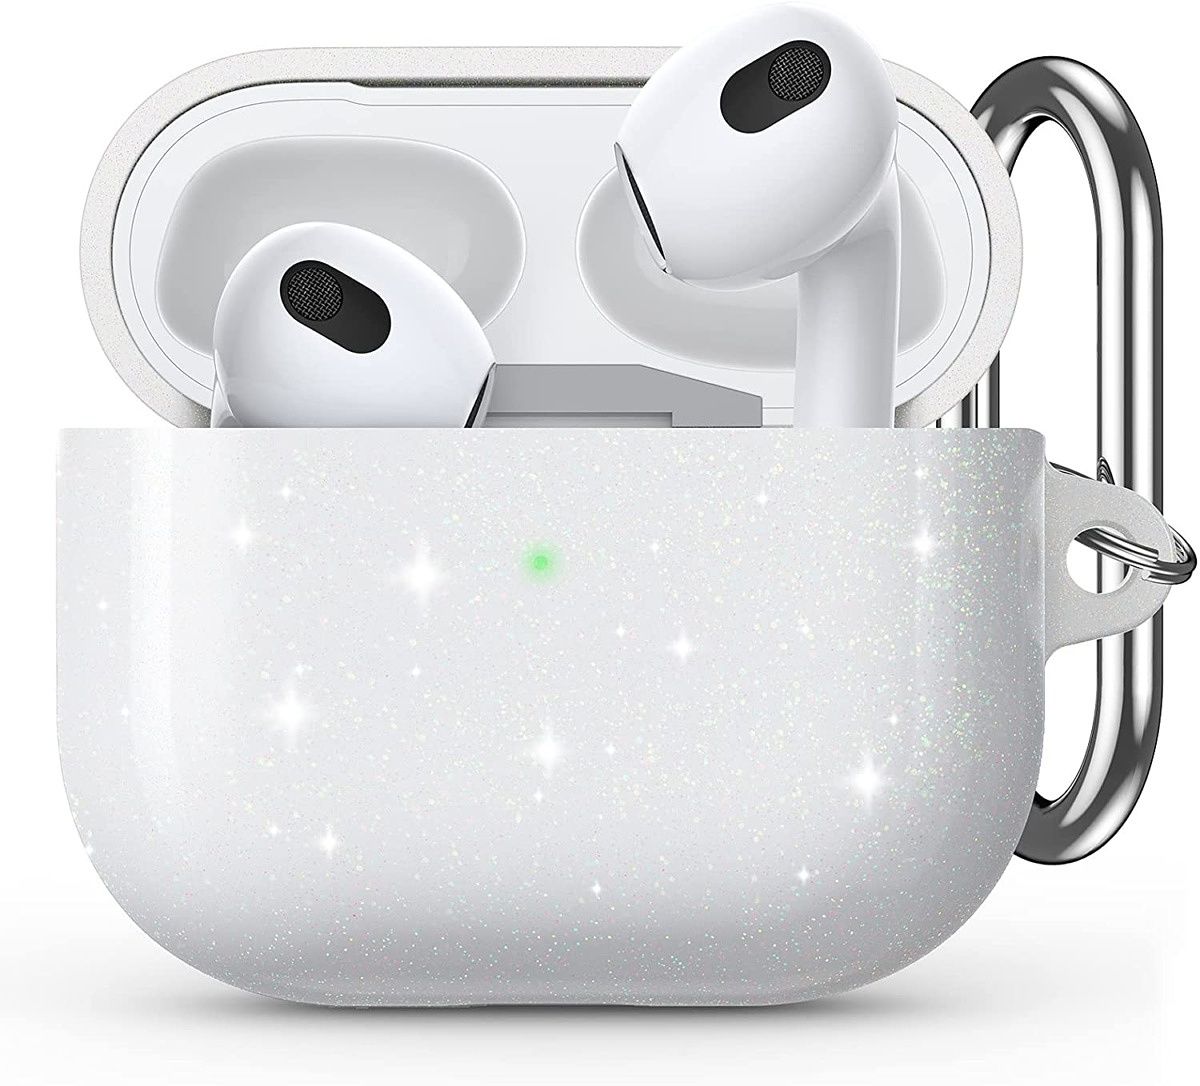 If you're looking to add some touches to your new AirPods 3, you might like this case from Humixx.  Comes with glitter to make your AirPods sparkle.  In addition, the case is made of durable materials to provide robust protection.